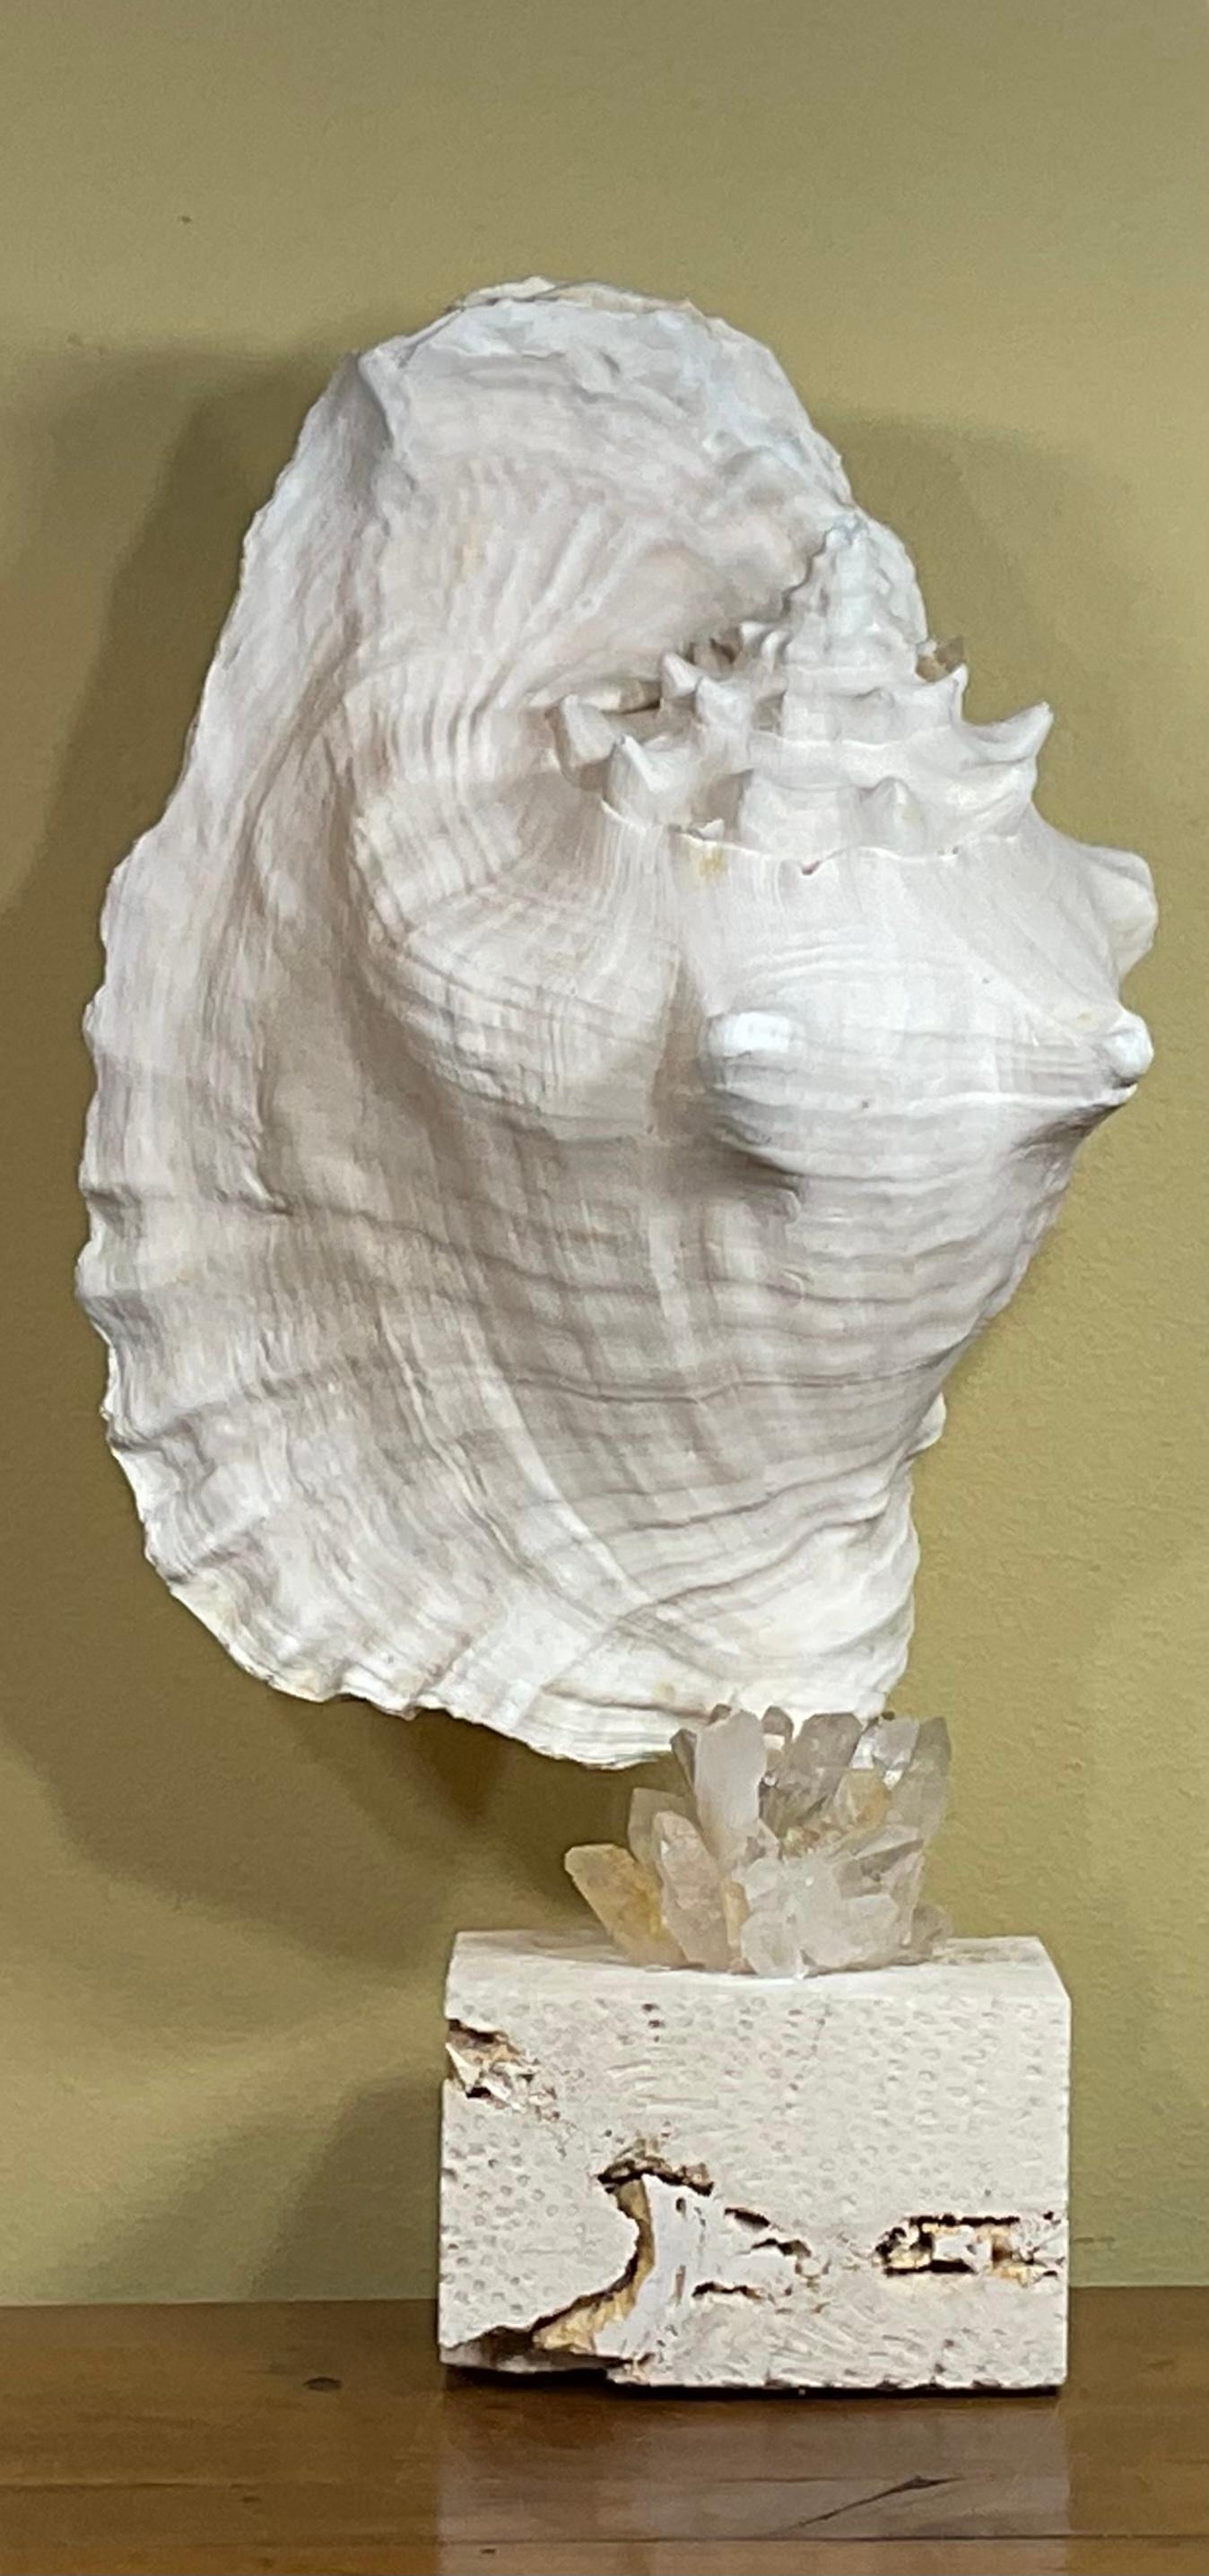 Beautiful conch shell professionally mounted on a coral base, with crystal quartz pieces artistically embedded in, decorative object of art for display.